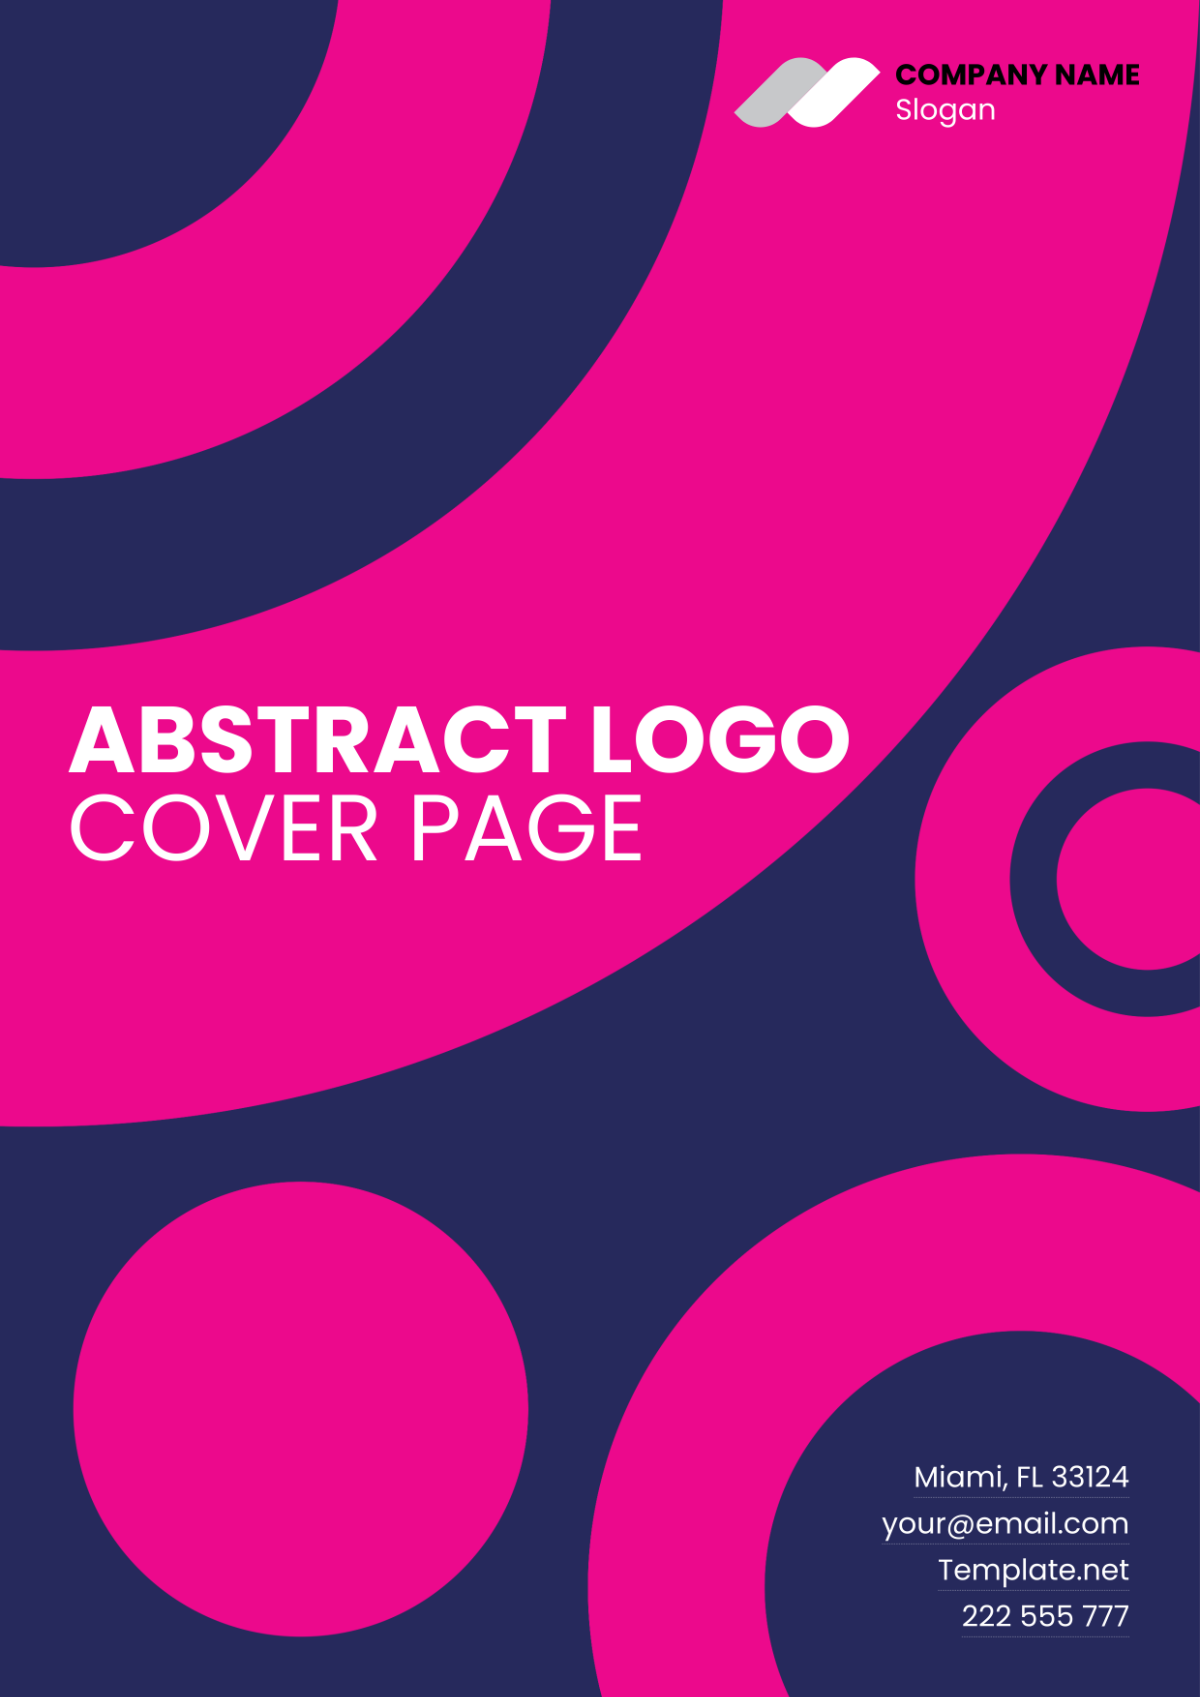 Abstract Logo Cover Page Template